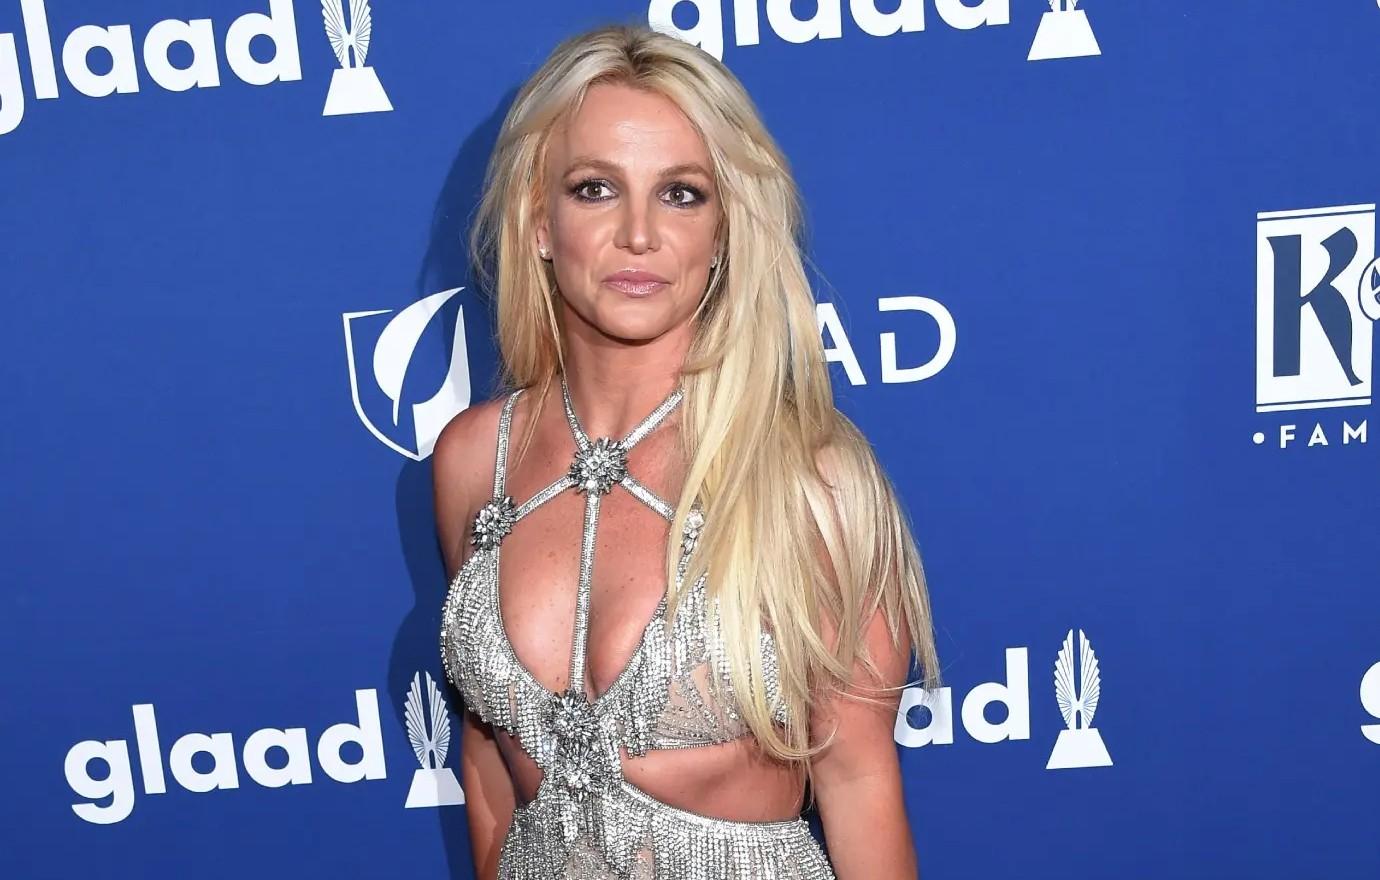 Britney Spears shares new close-up photo of her boobs spilling out